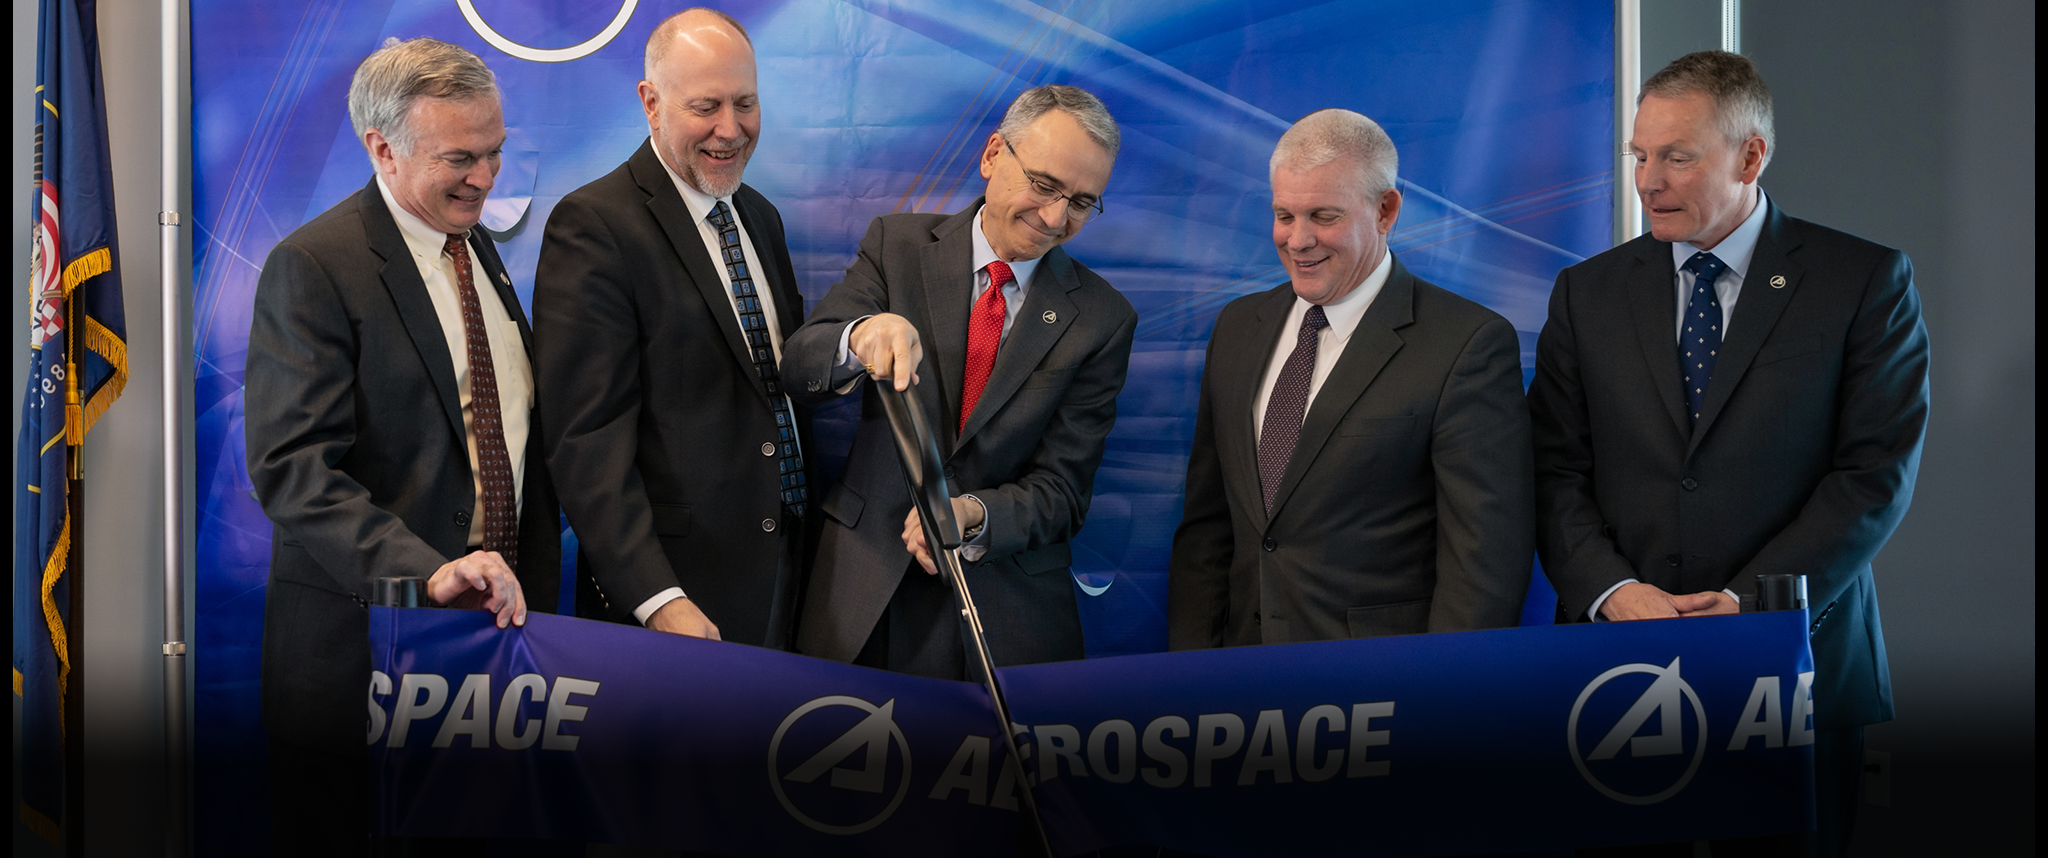 Aerospace celebrated its newly expanded offices at Hill Air Force Base in Utah, where significant work is being done to support the modernization of the nation’s capabilities to outpace the threat..